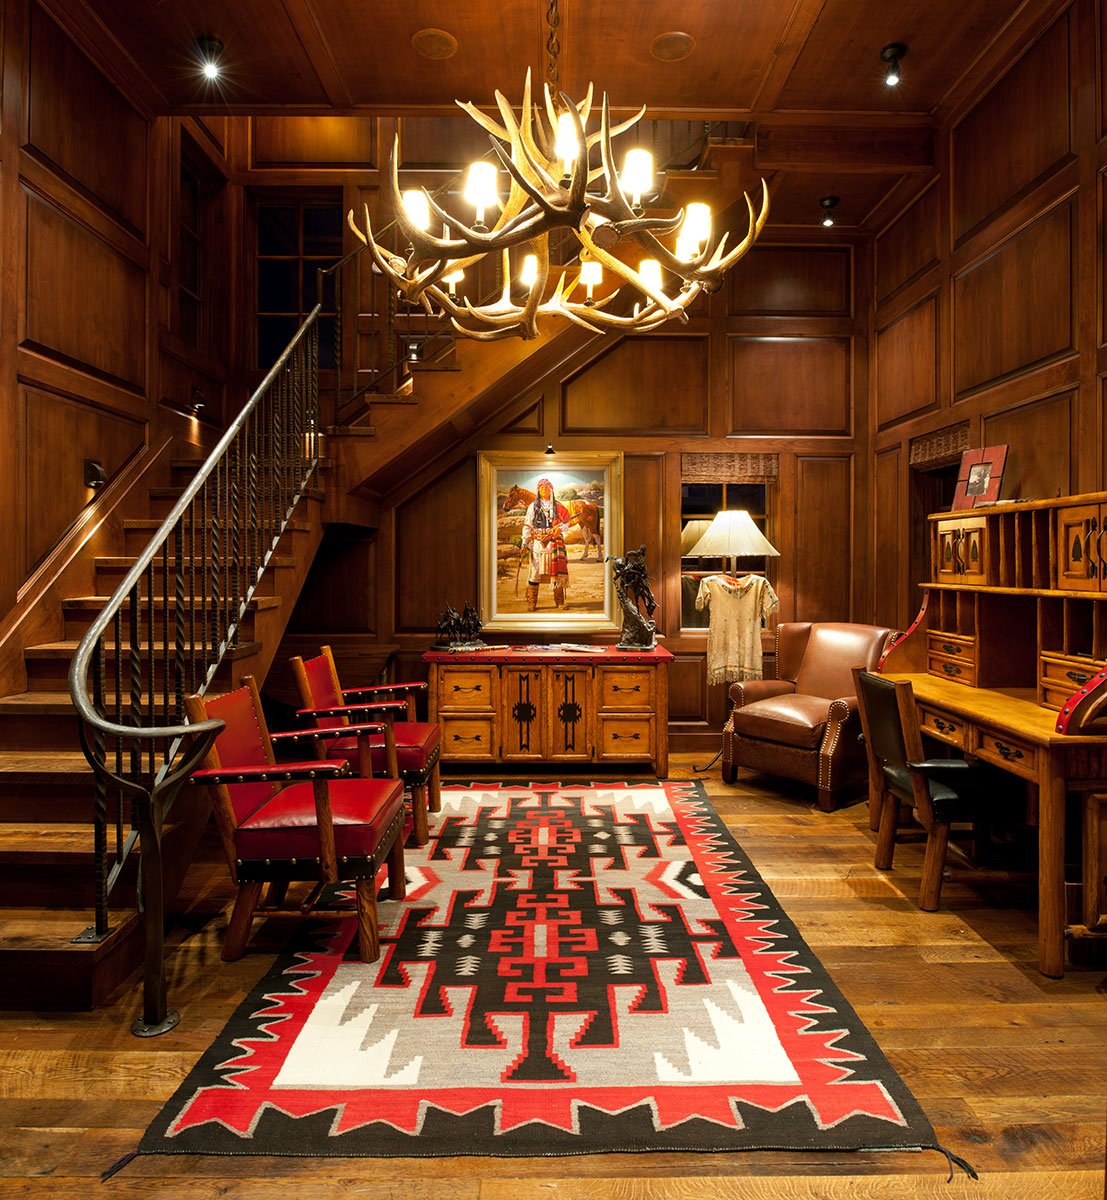 l-shaped staircase and western style furnishings